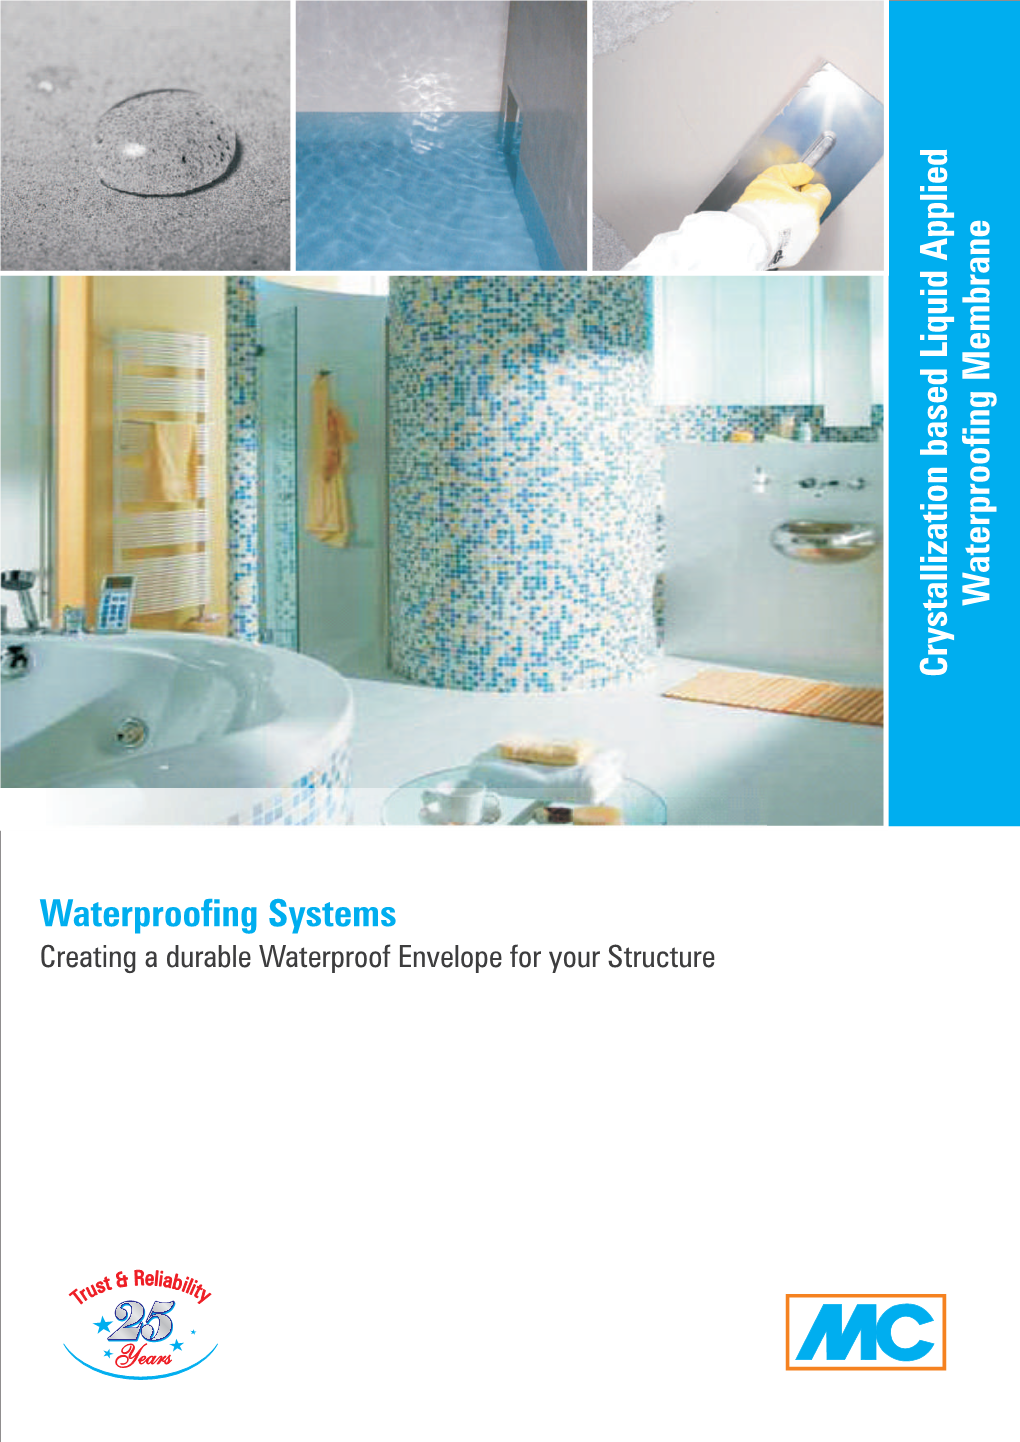 Waterproofing Systems Creating a Durable Waterproof Envelope for Your Structure Waterproofing What Is Needed?